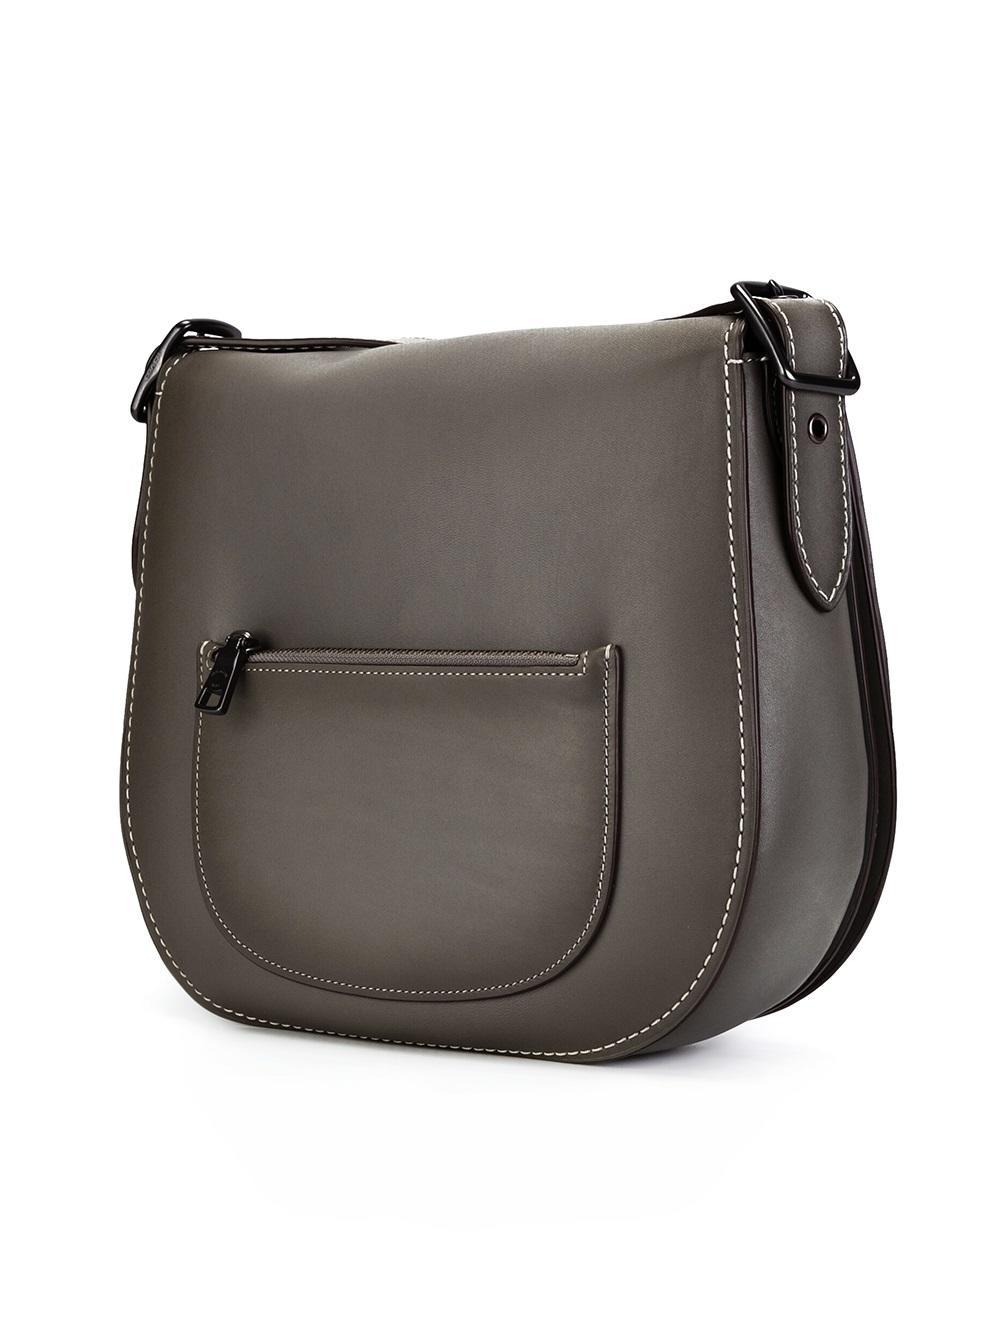 Coach Large Saddle Bag in Gray | Lyst